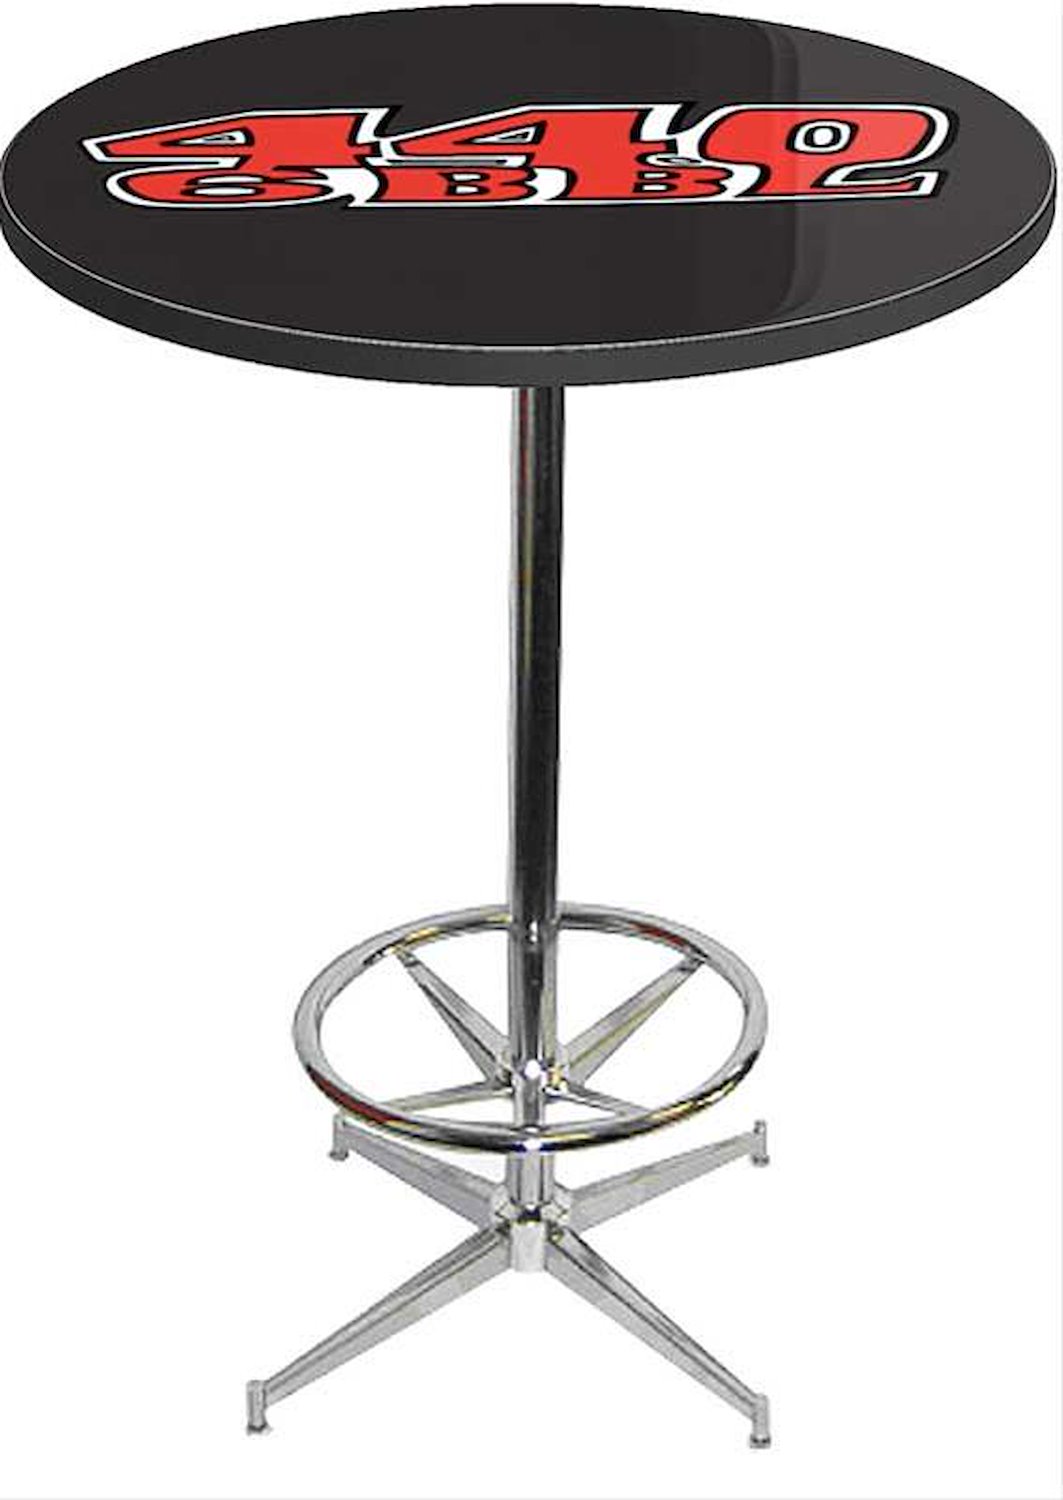 MD673112 Pub Table With Chrome Base And Foot Rest Mopar 440 6 Bbl Logo Pub Table With Chrome Base And Foot Rest